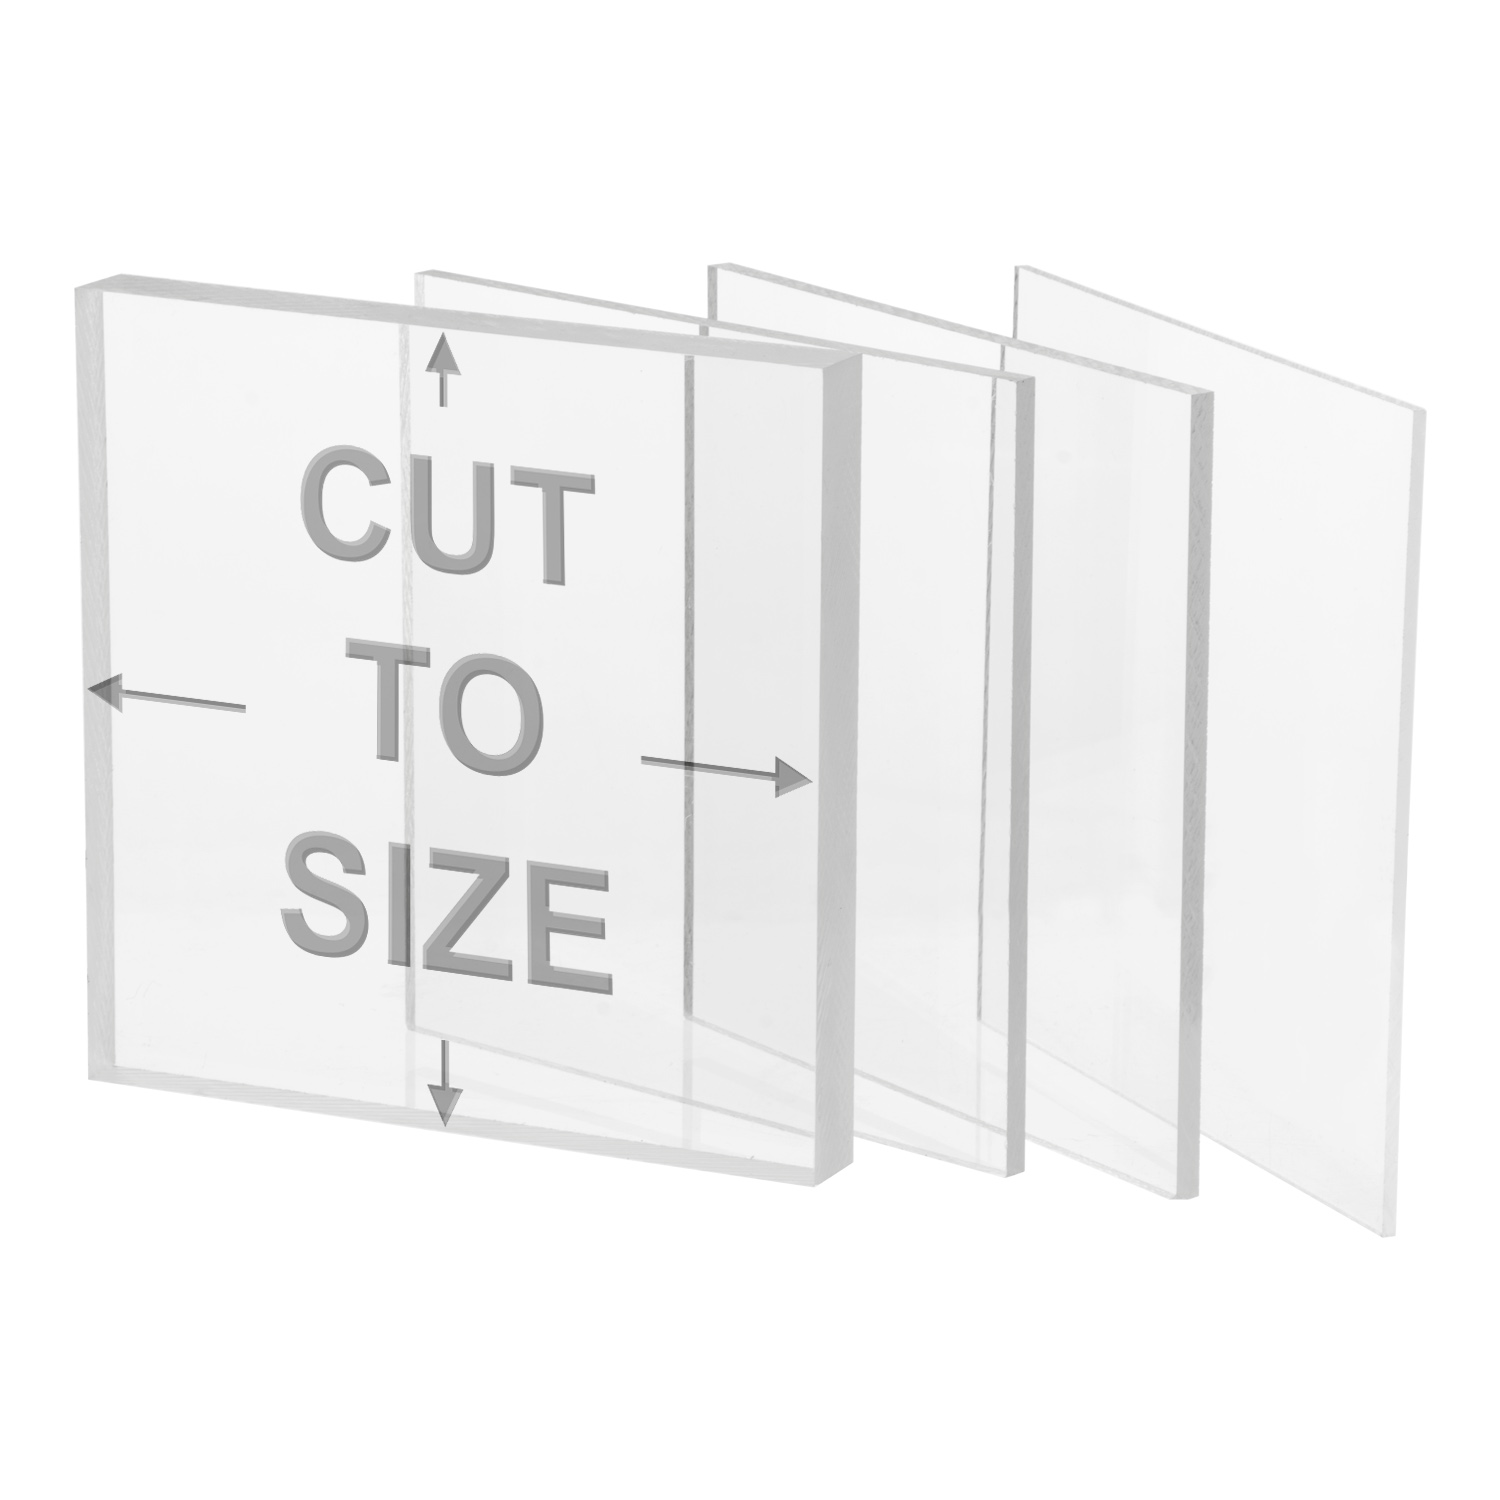 1/4-Thick x 35 7/8-Long Clear Extruded Square Acrylic Rod